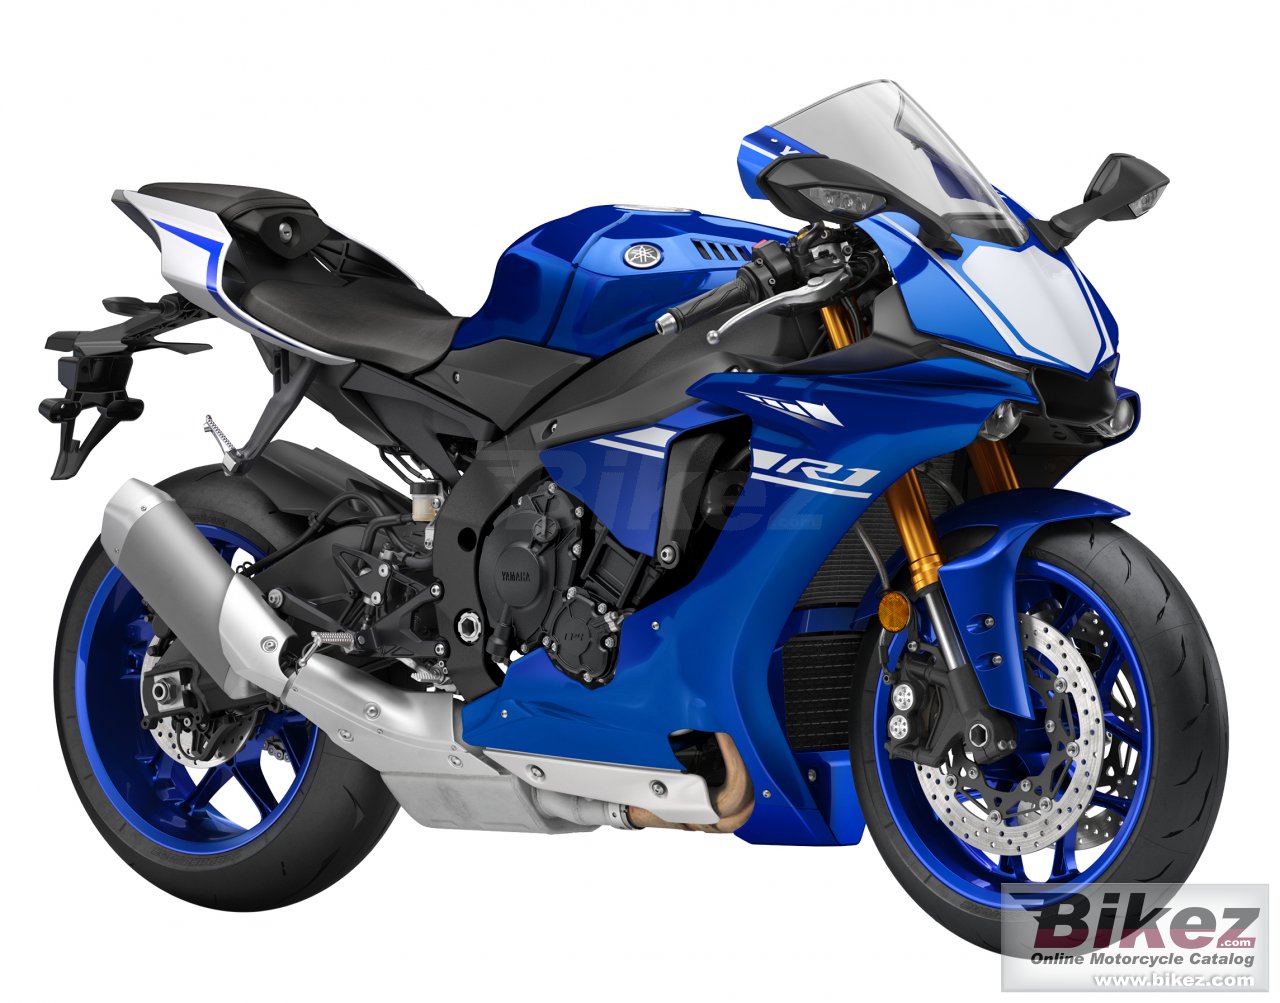 The YZF-R1 Motorcycle Poster